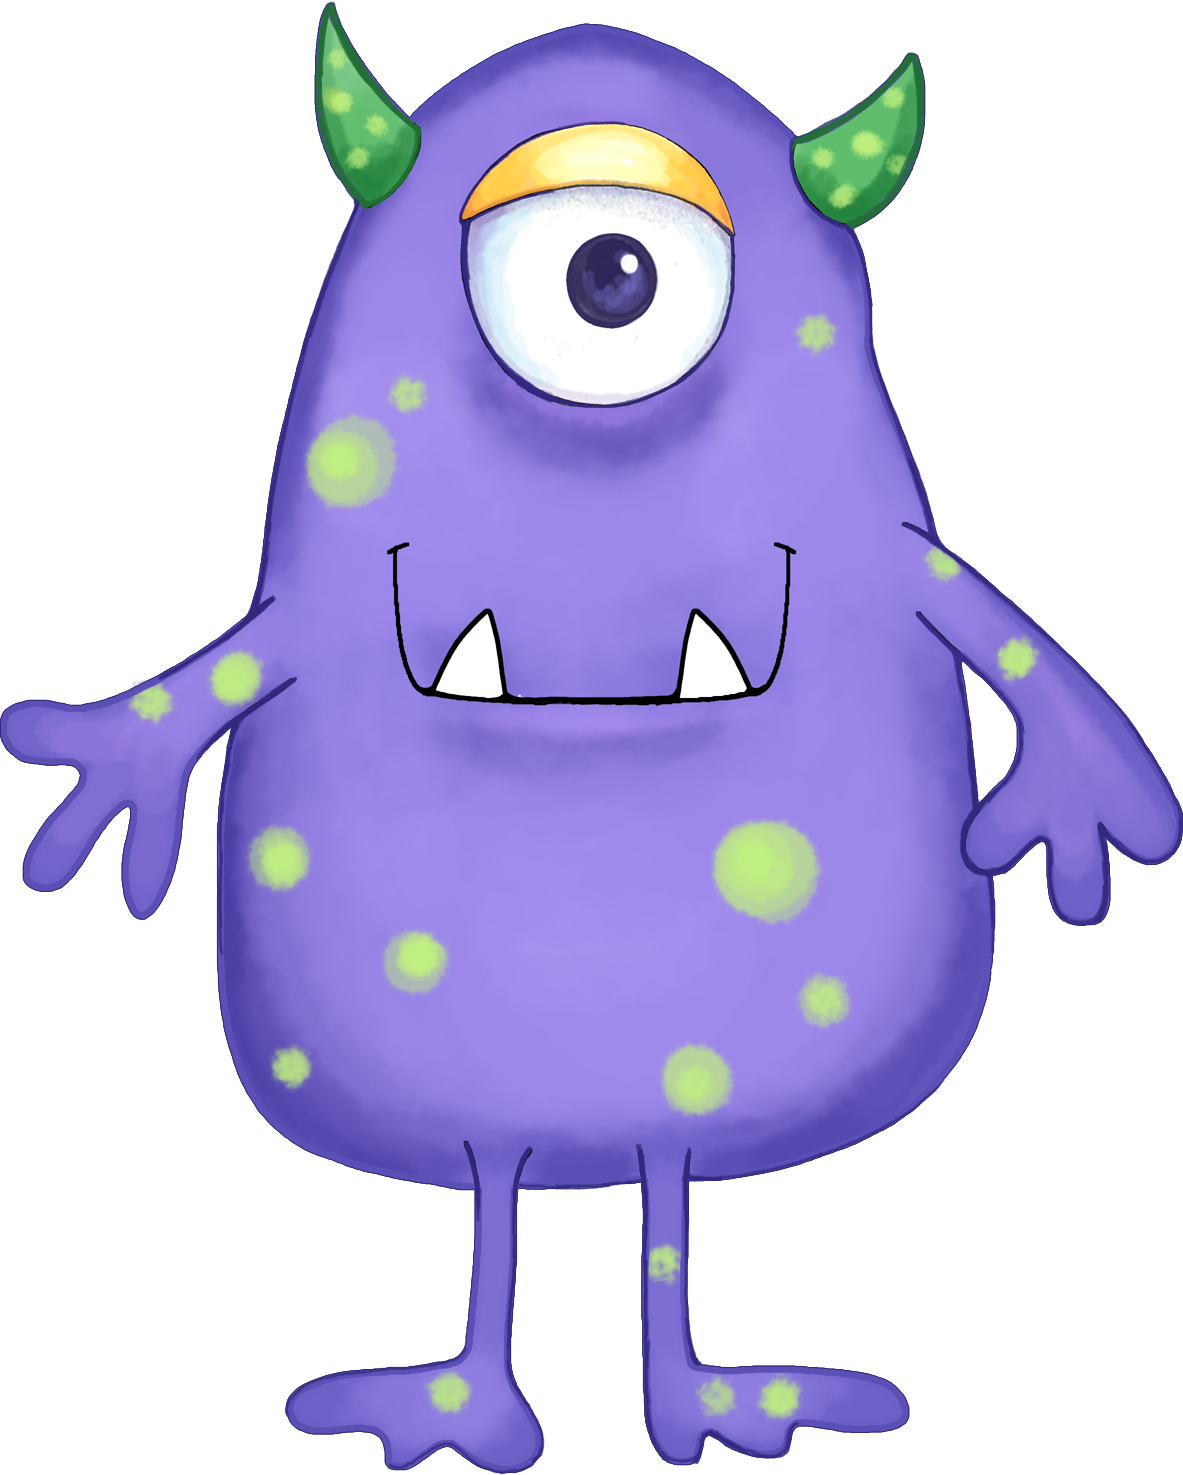 1000+ images about Monsters patterns | Felt monster ...